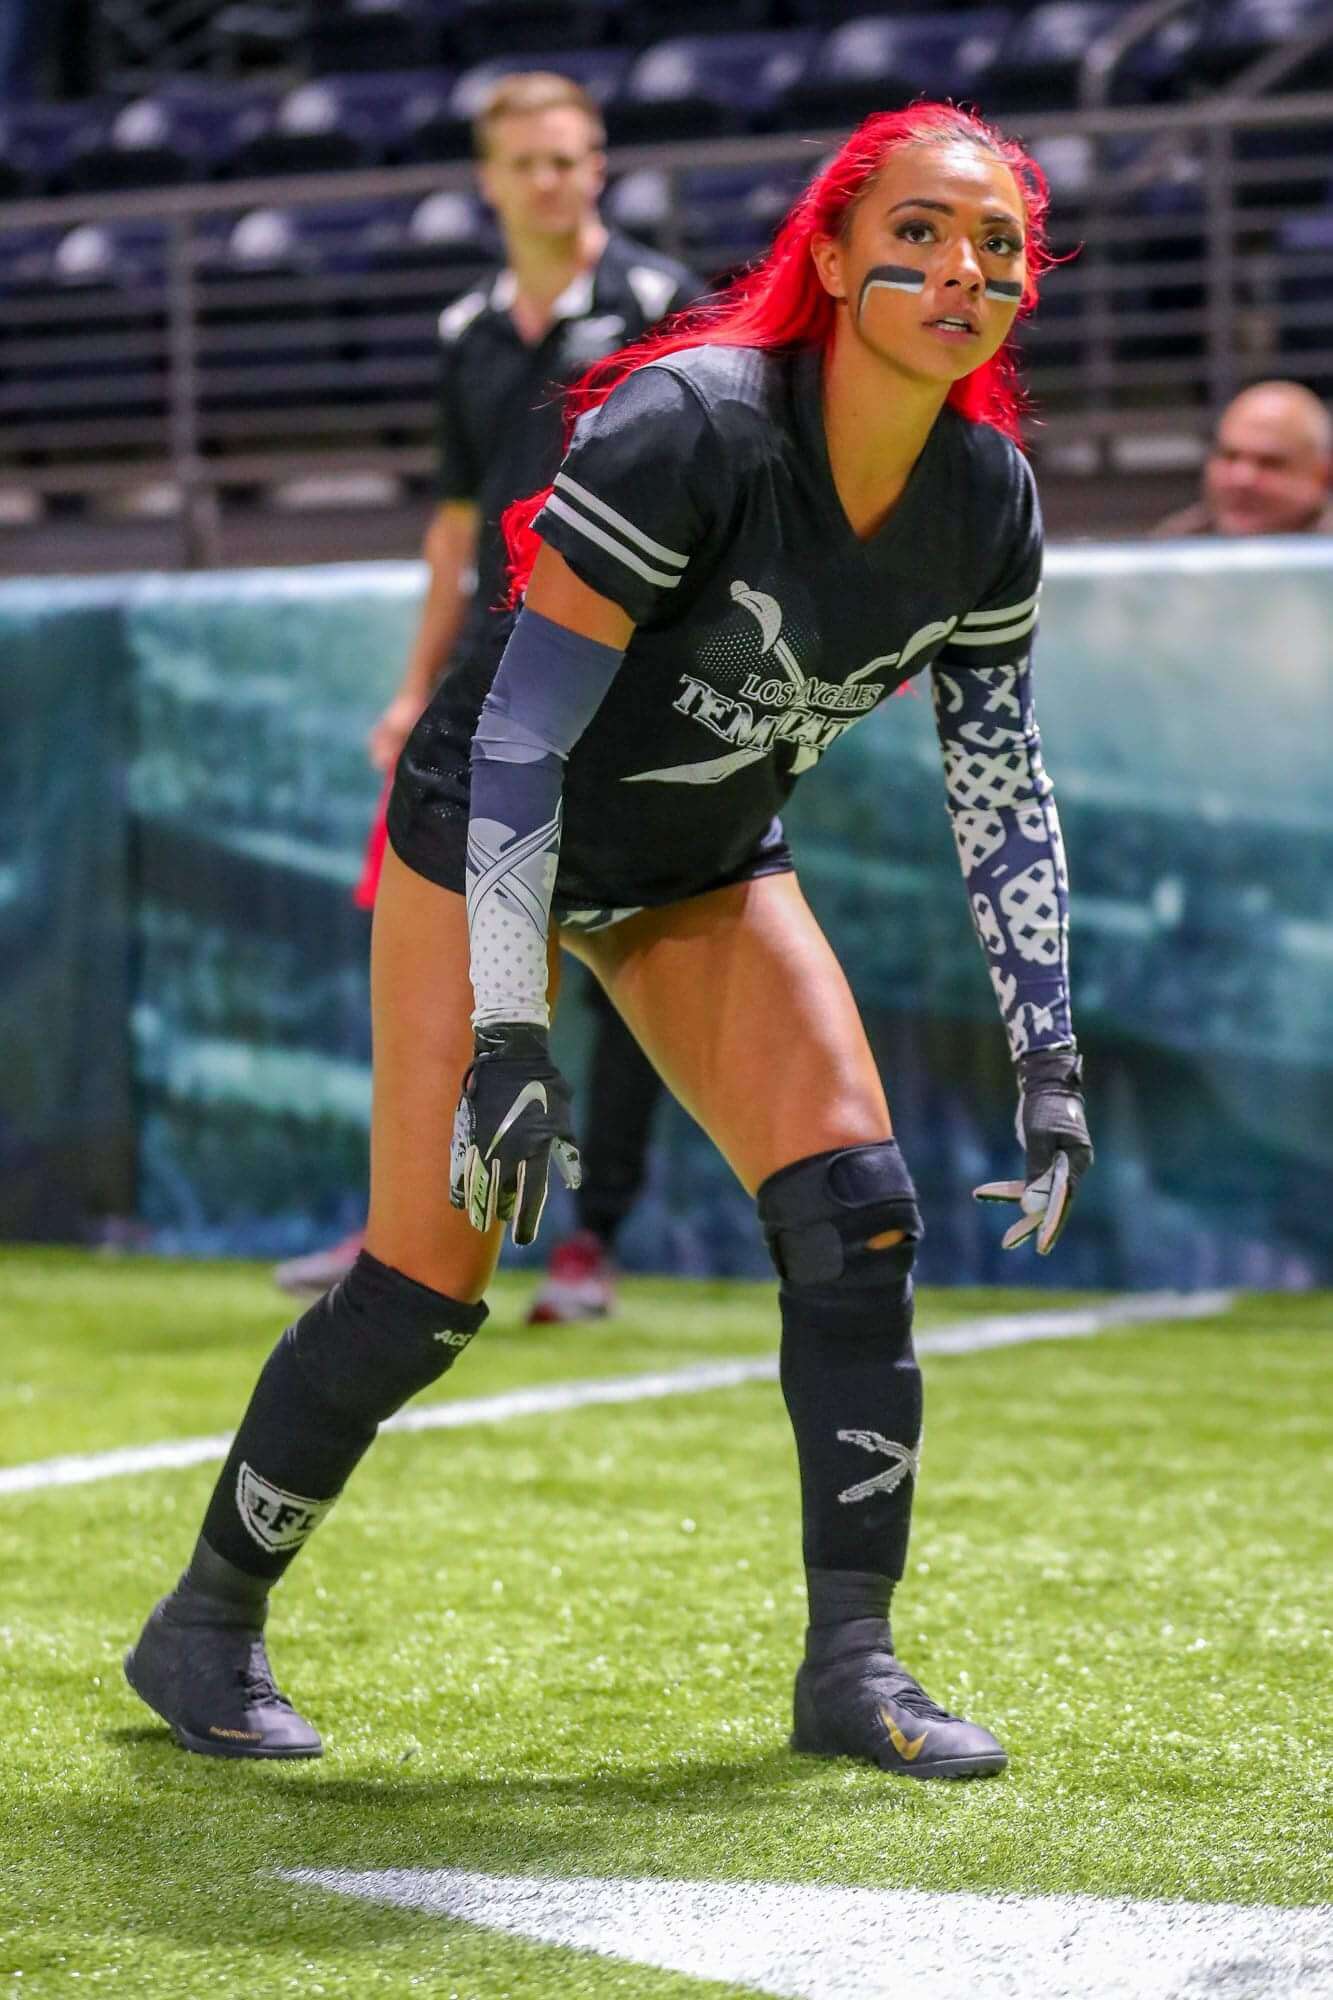 The Legends Football League Beautiful Women And Football, Need We Say Anymore! 98